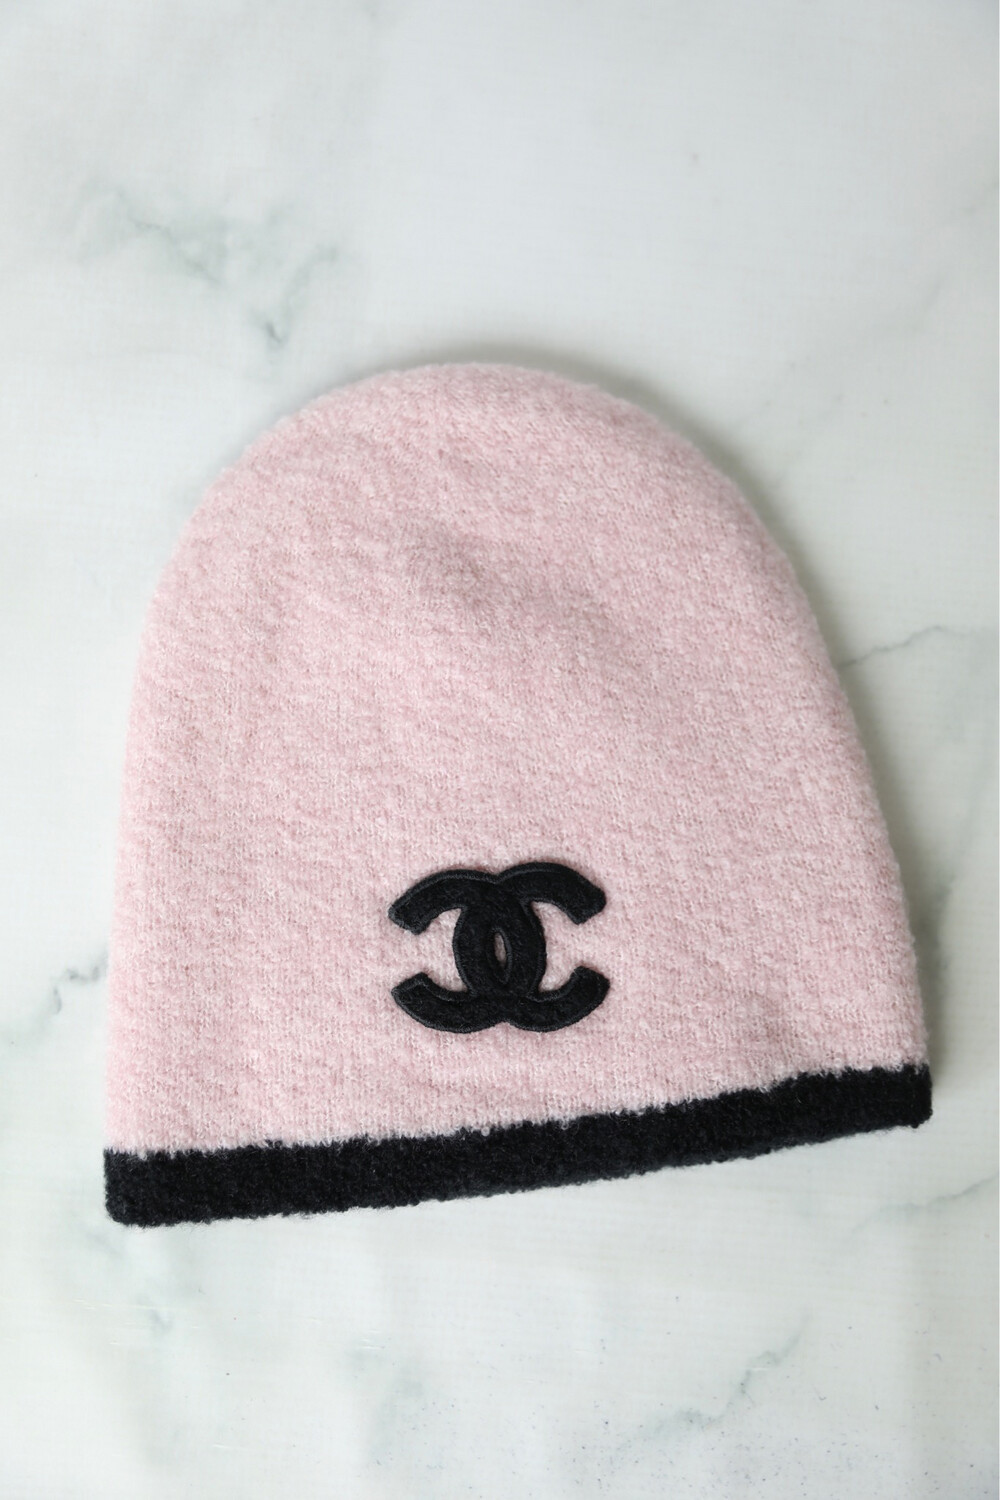 Chanel Hat Beanie, Pink and Black, New without Box MA001